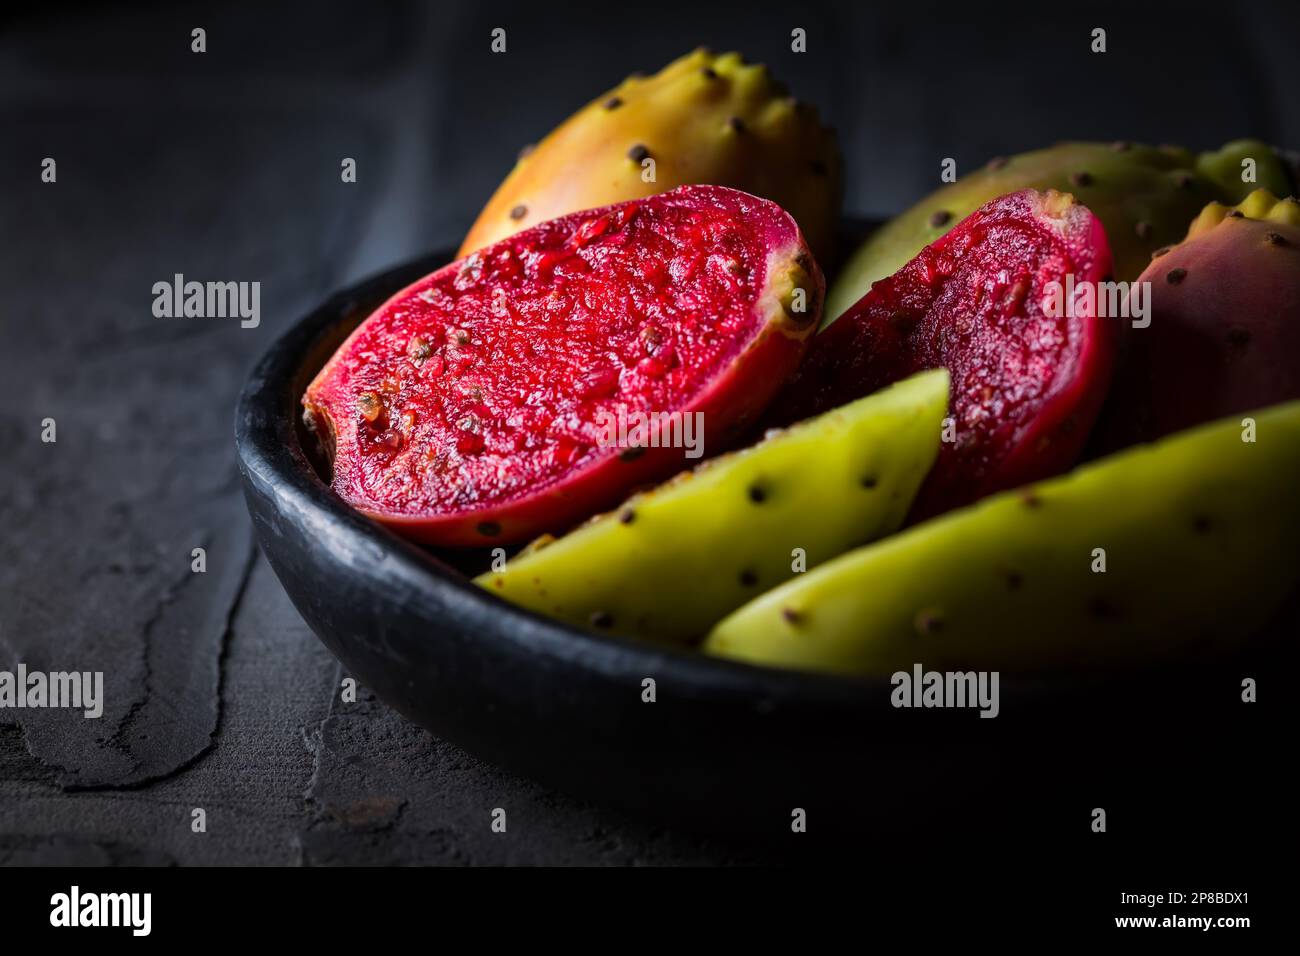 Prickly pear in black bowl on black background Stock Photo